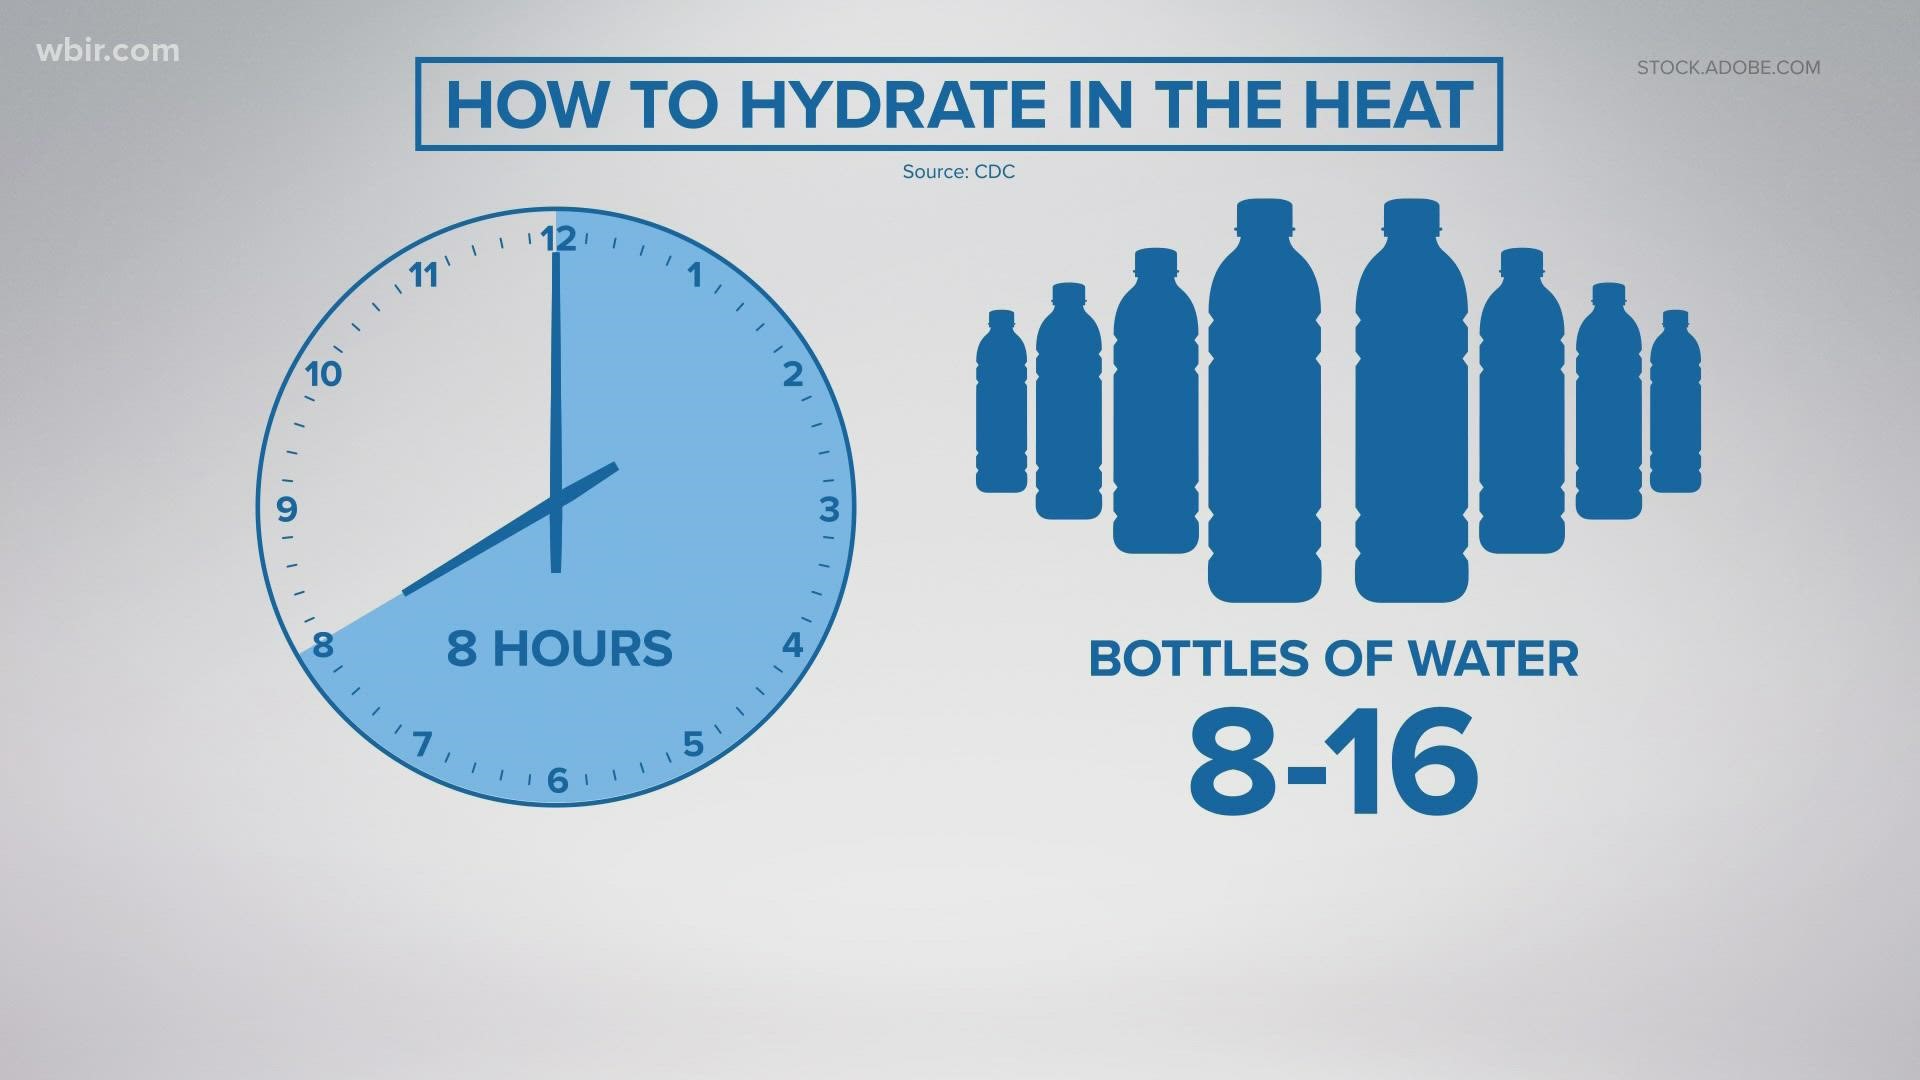 Hydration for staying hydrated in hot weather